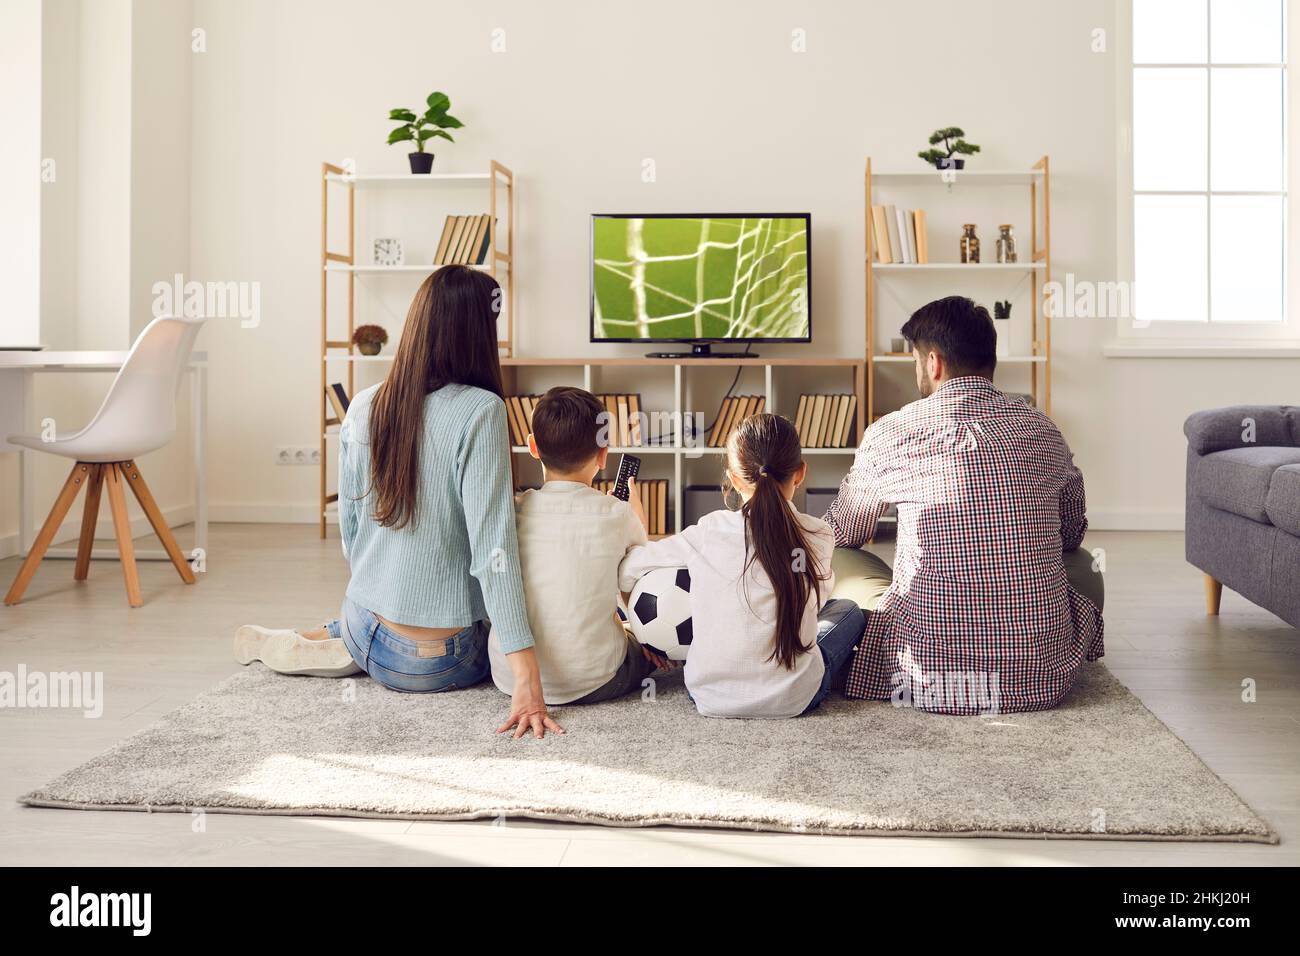 Family with children watching football match together at home cheering for their favorite team. Stock Photo